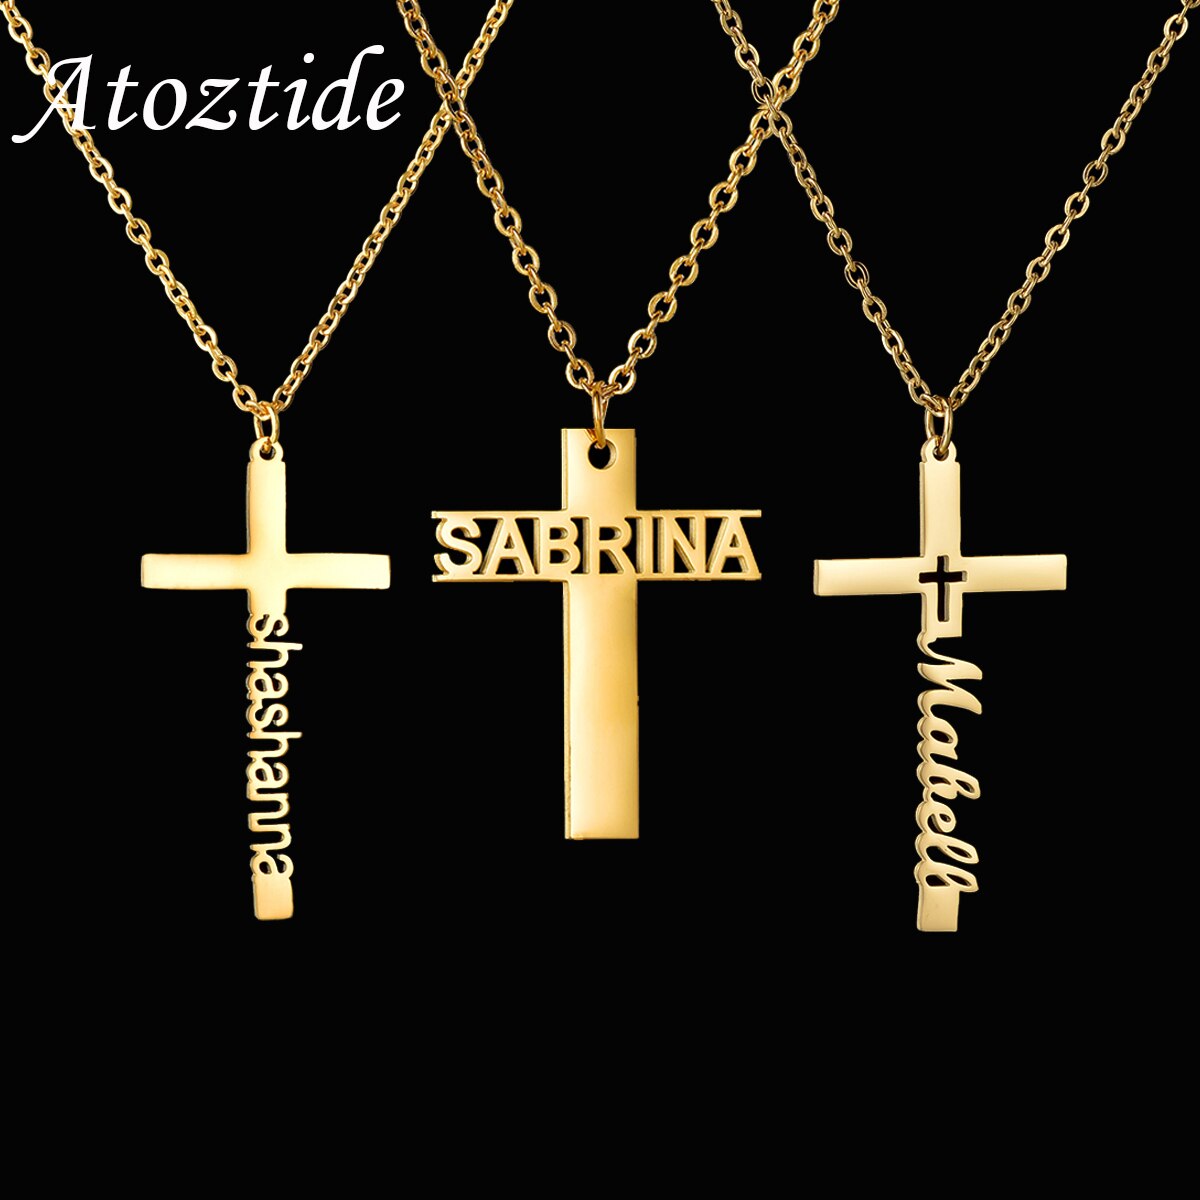 Personalized Name Cross Necklace